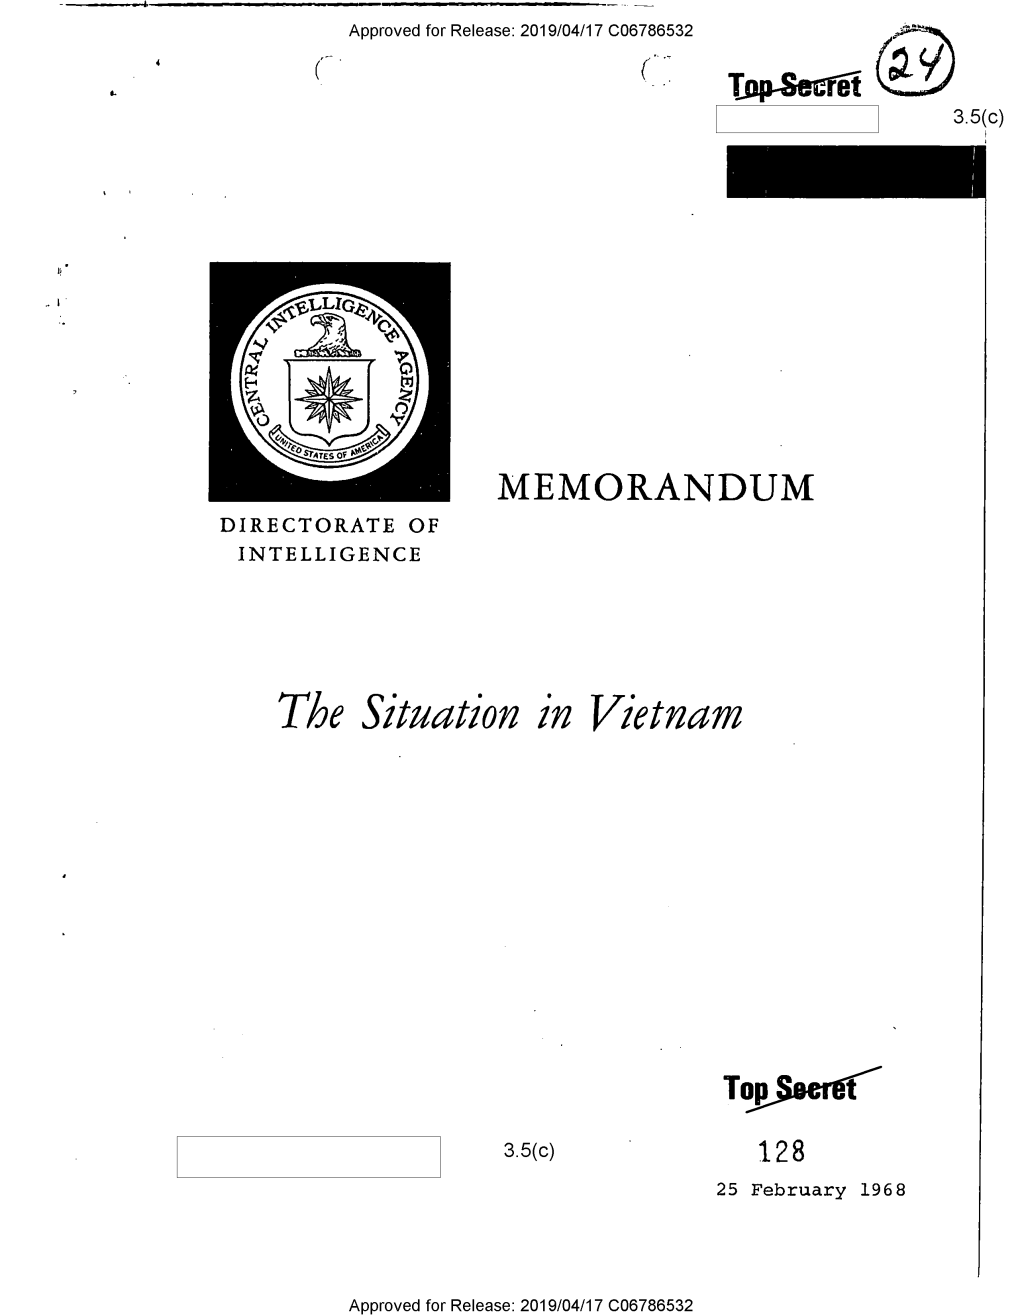 Report on the Situation in Vietnam, 25 February 1968